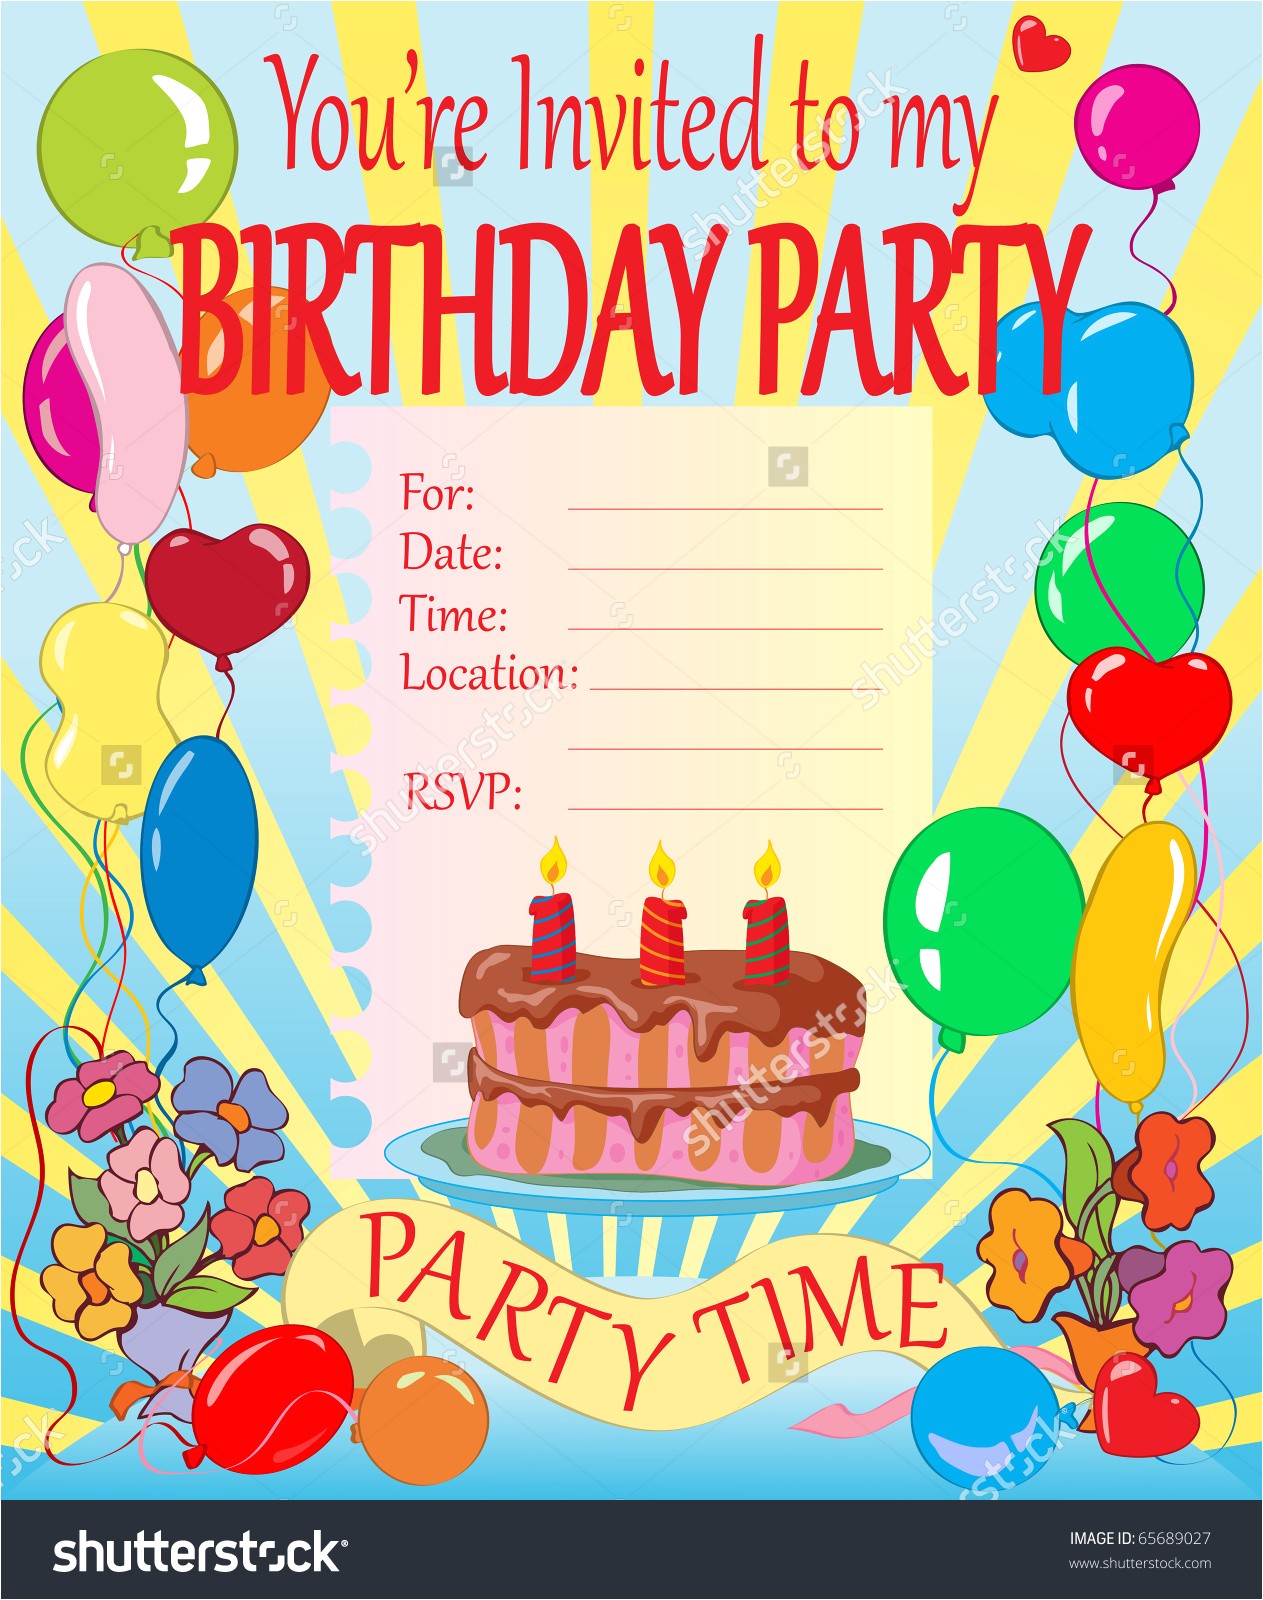 Make An Invitation Card for Your Birthday Party Creatively top 19 Invitation Cards for Birthday Party theruntime Com